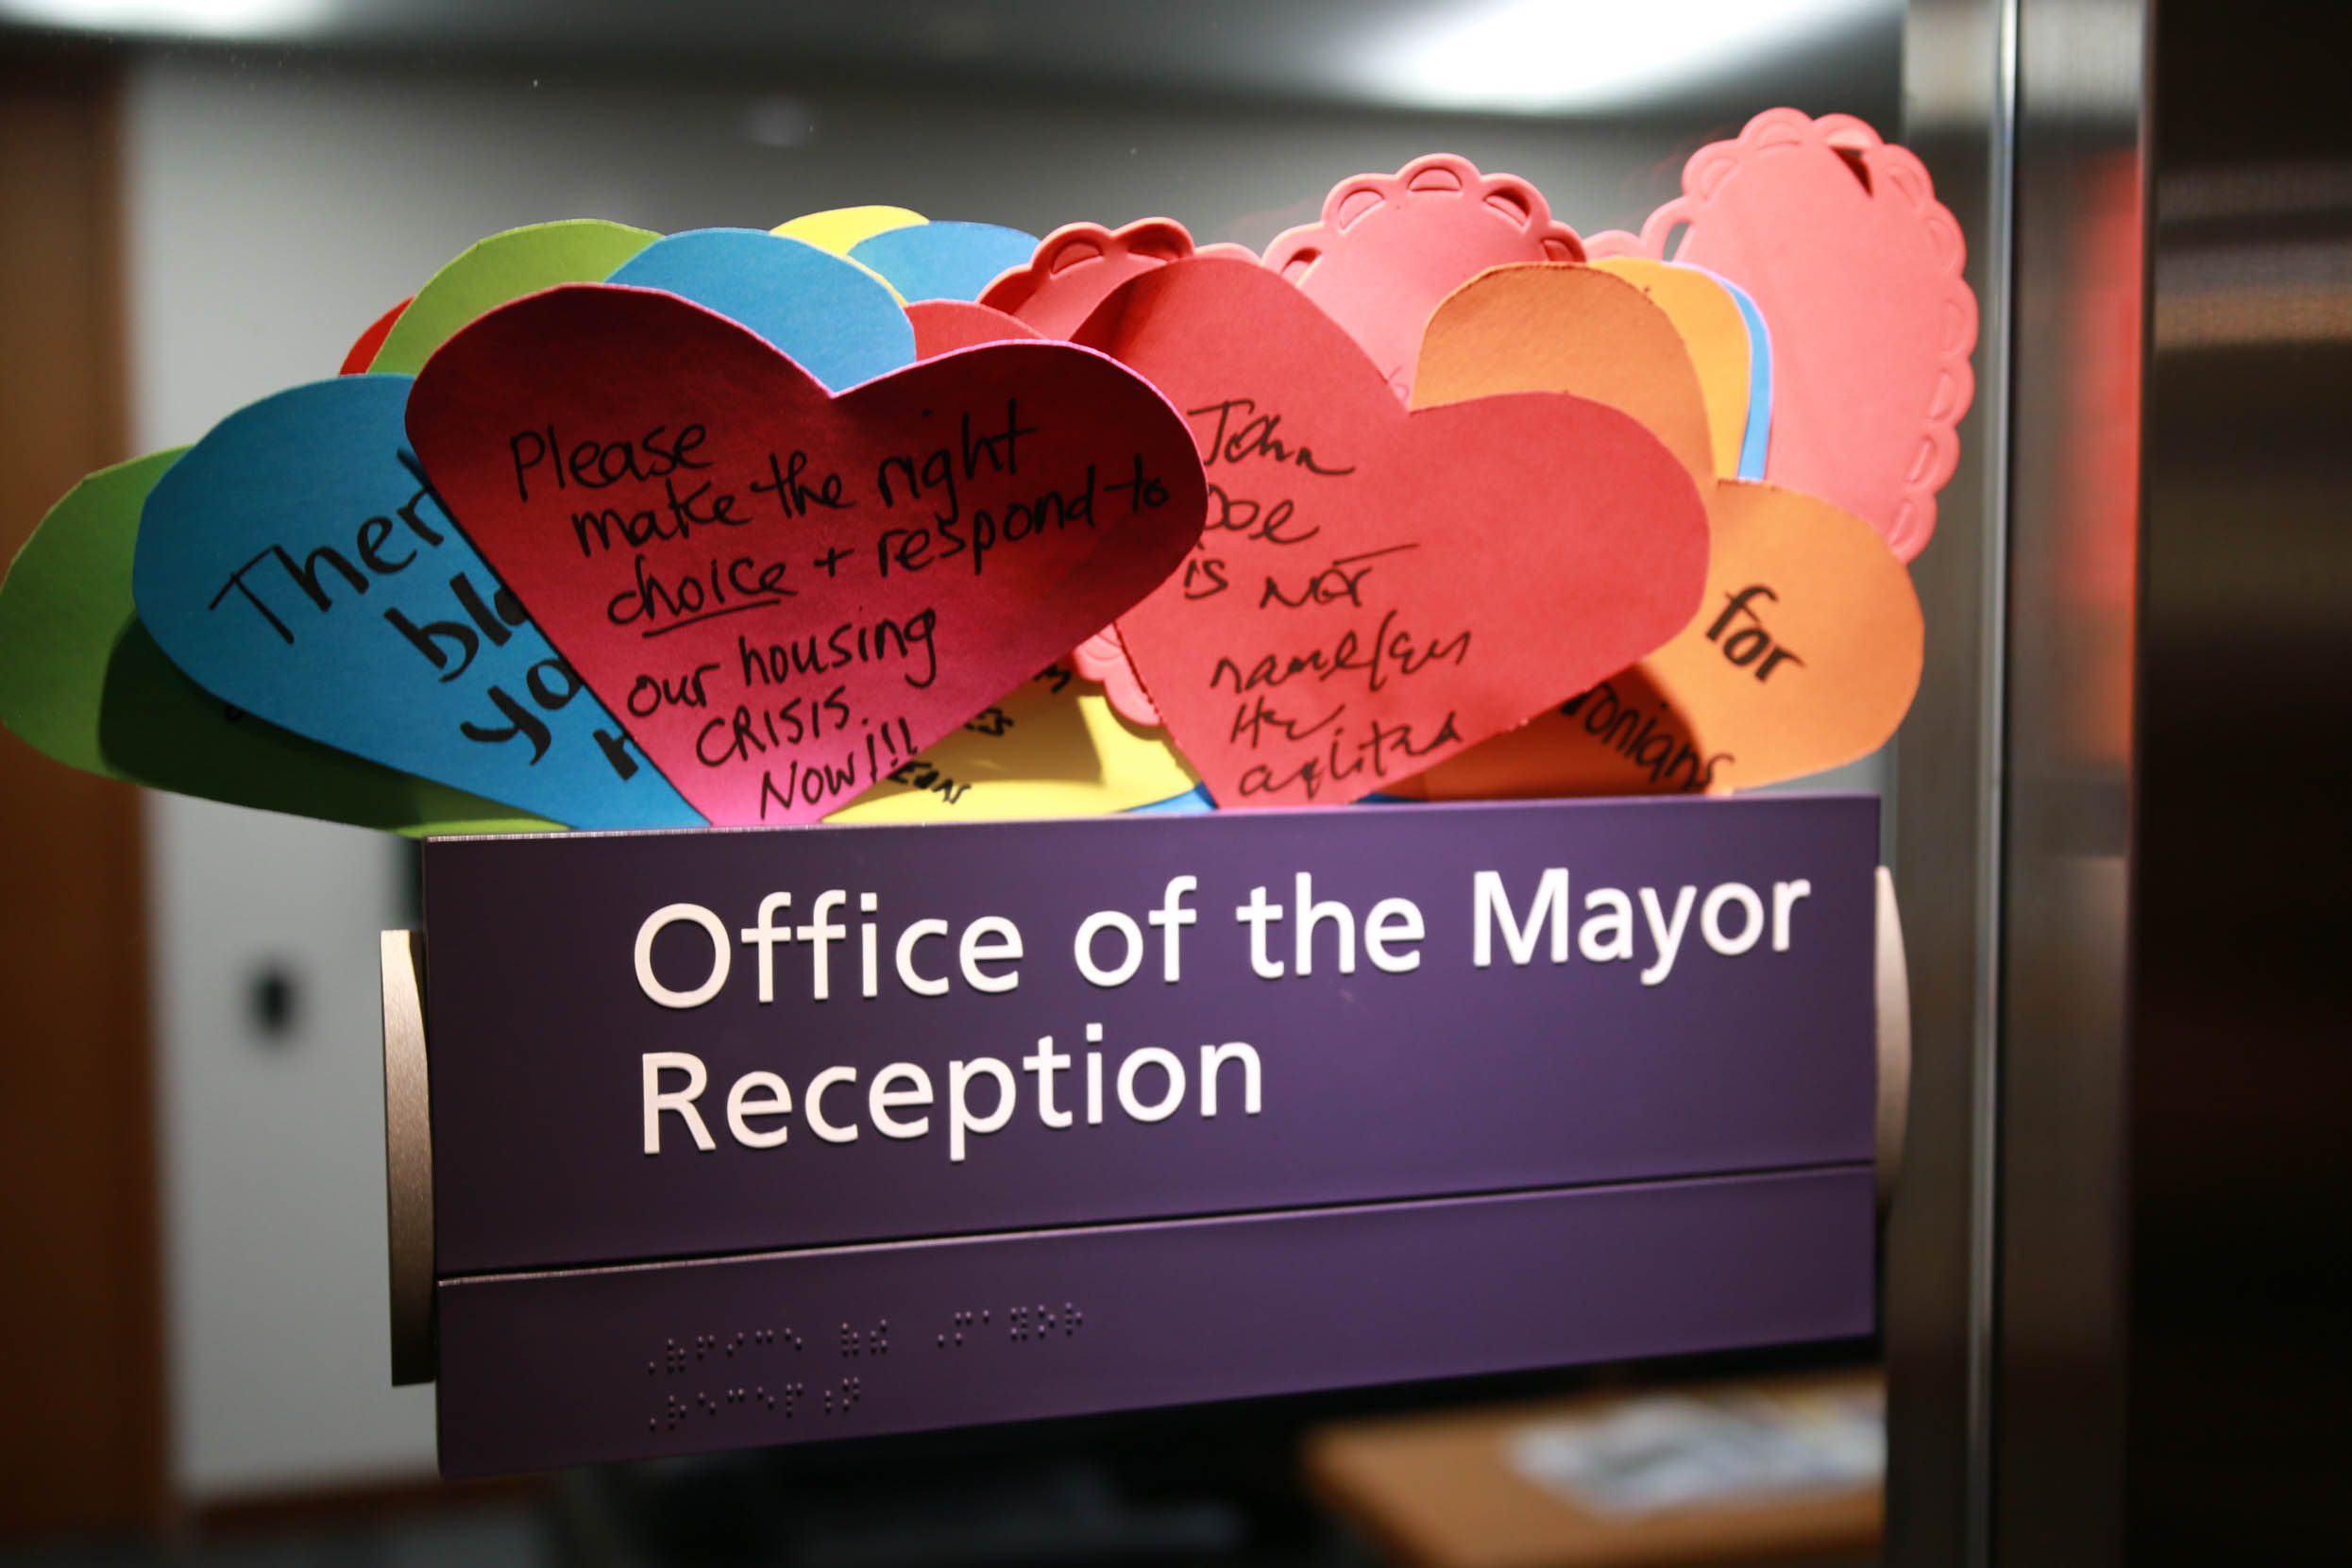 Handwritten hearts are left outside Toronto Mayor's office. One says 'Please make the right choice and respond to our housing crisis now!!' Photo credit: Paul Salvatori